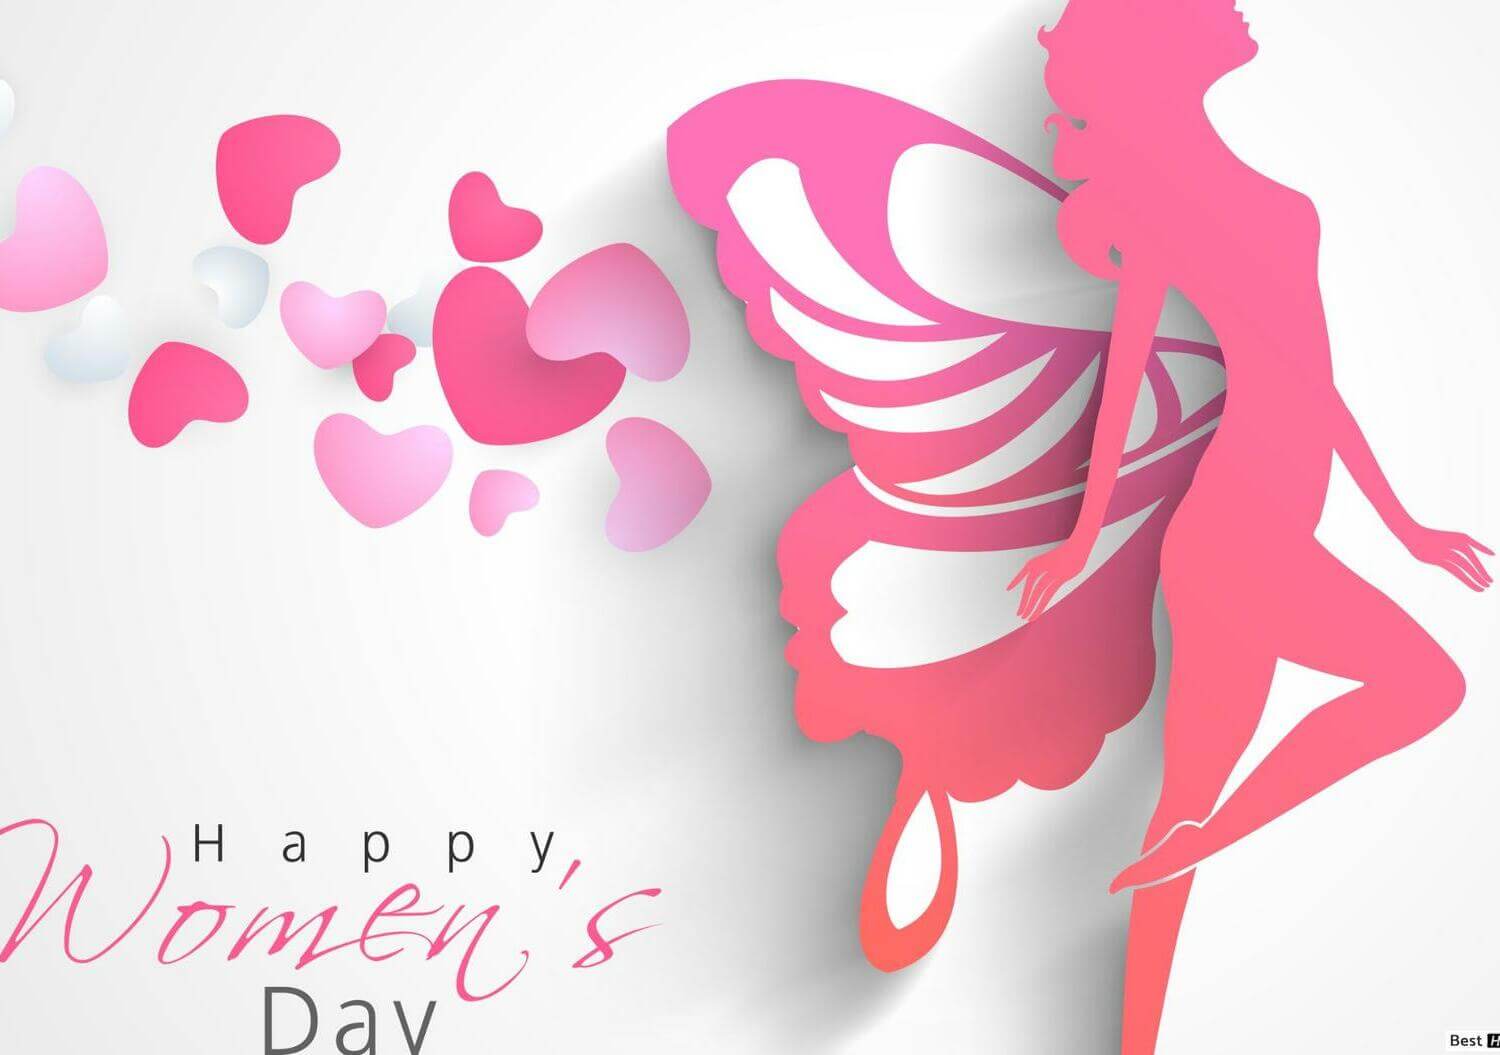 Special Wishes By Special Ladies Of Bollywood On Women&amp;#39;s Day